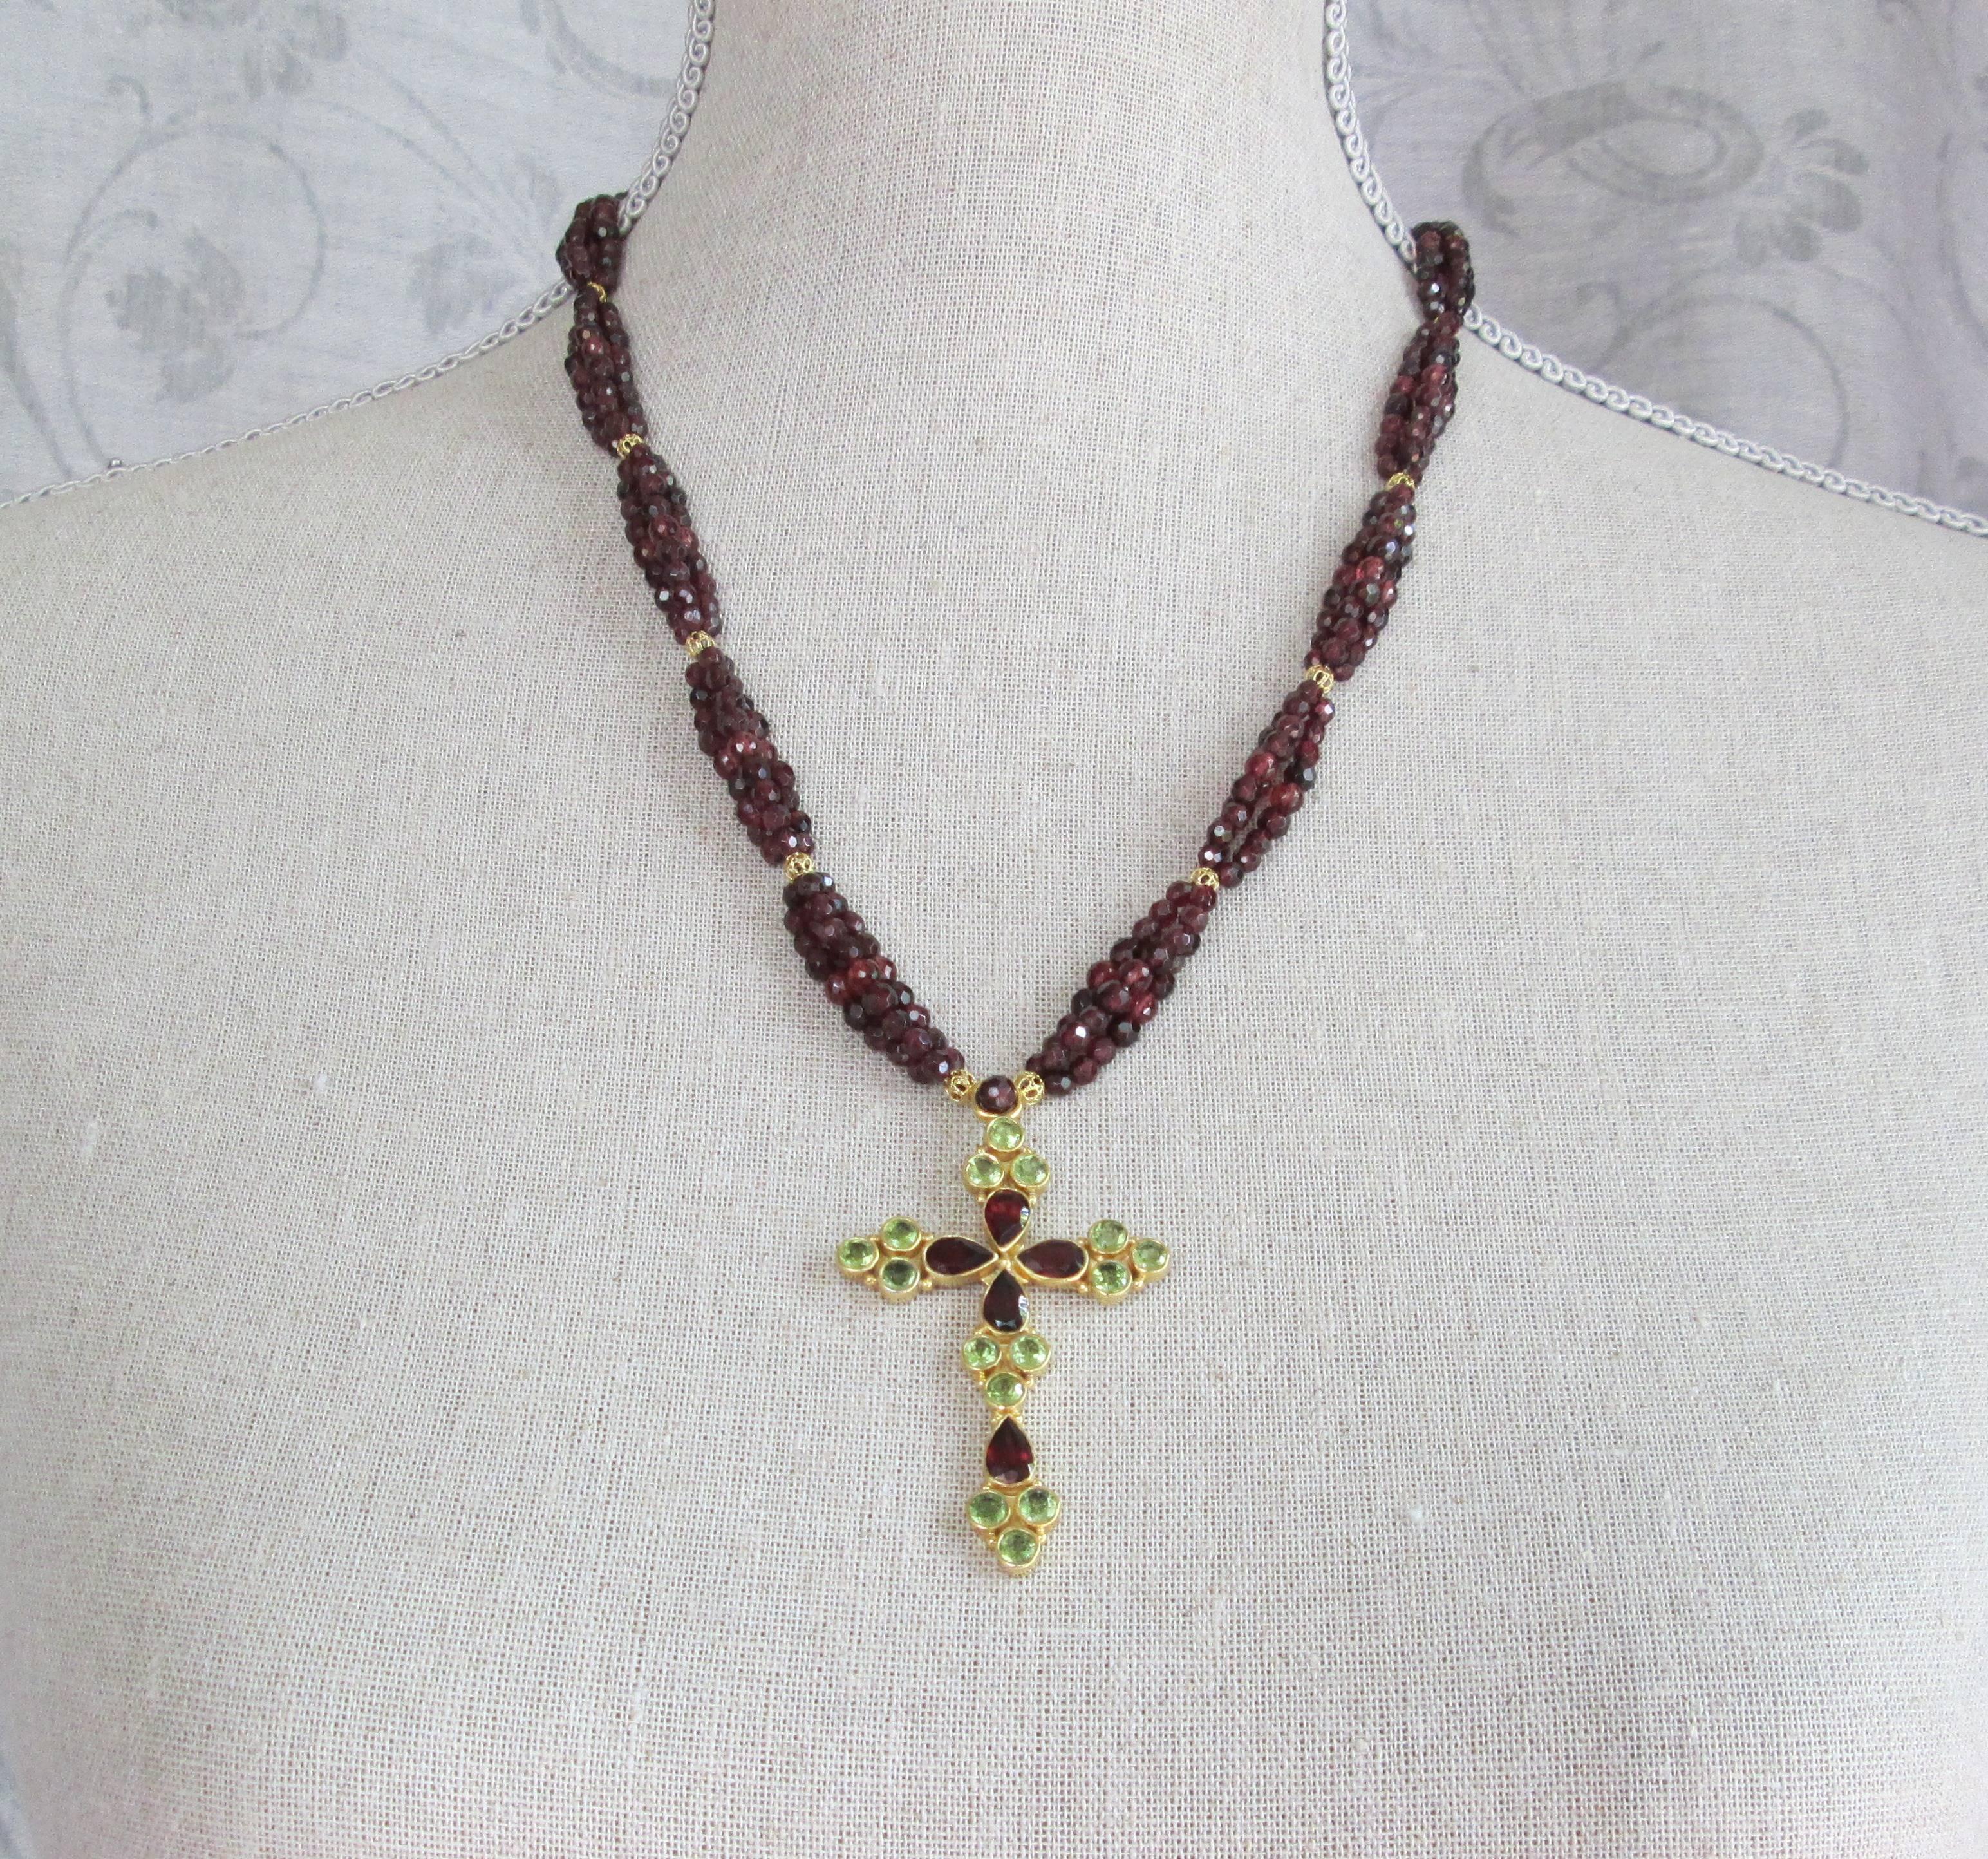 This striking necklace features strands of faceted garnet beads (3-3.5mm) clustered in threes, and divided by gold over silver plated vintage filigree beads. The cross is exquisitely cast in silver with gold plating, and set with precisely cut